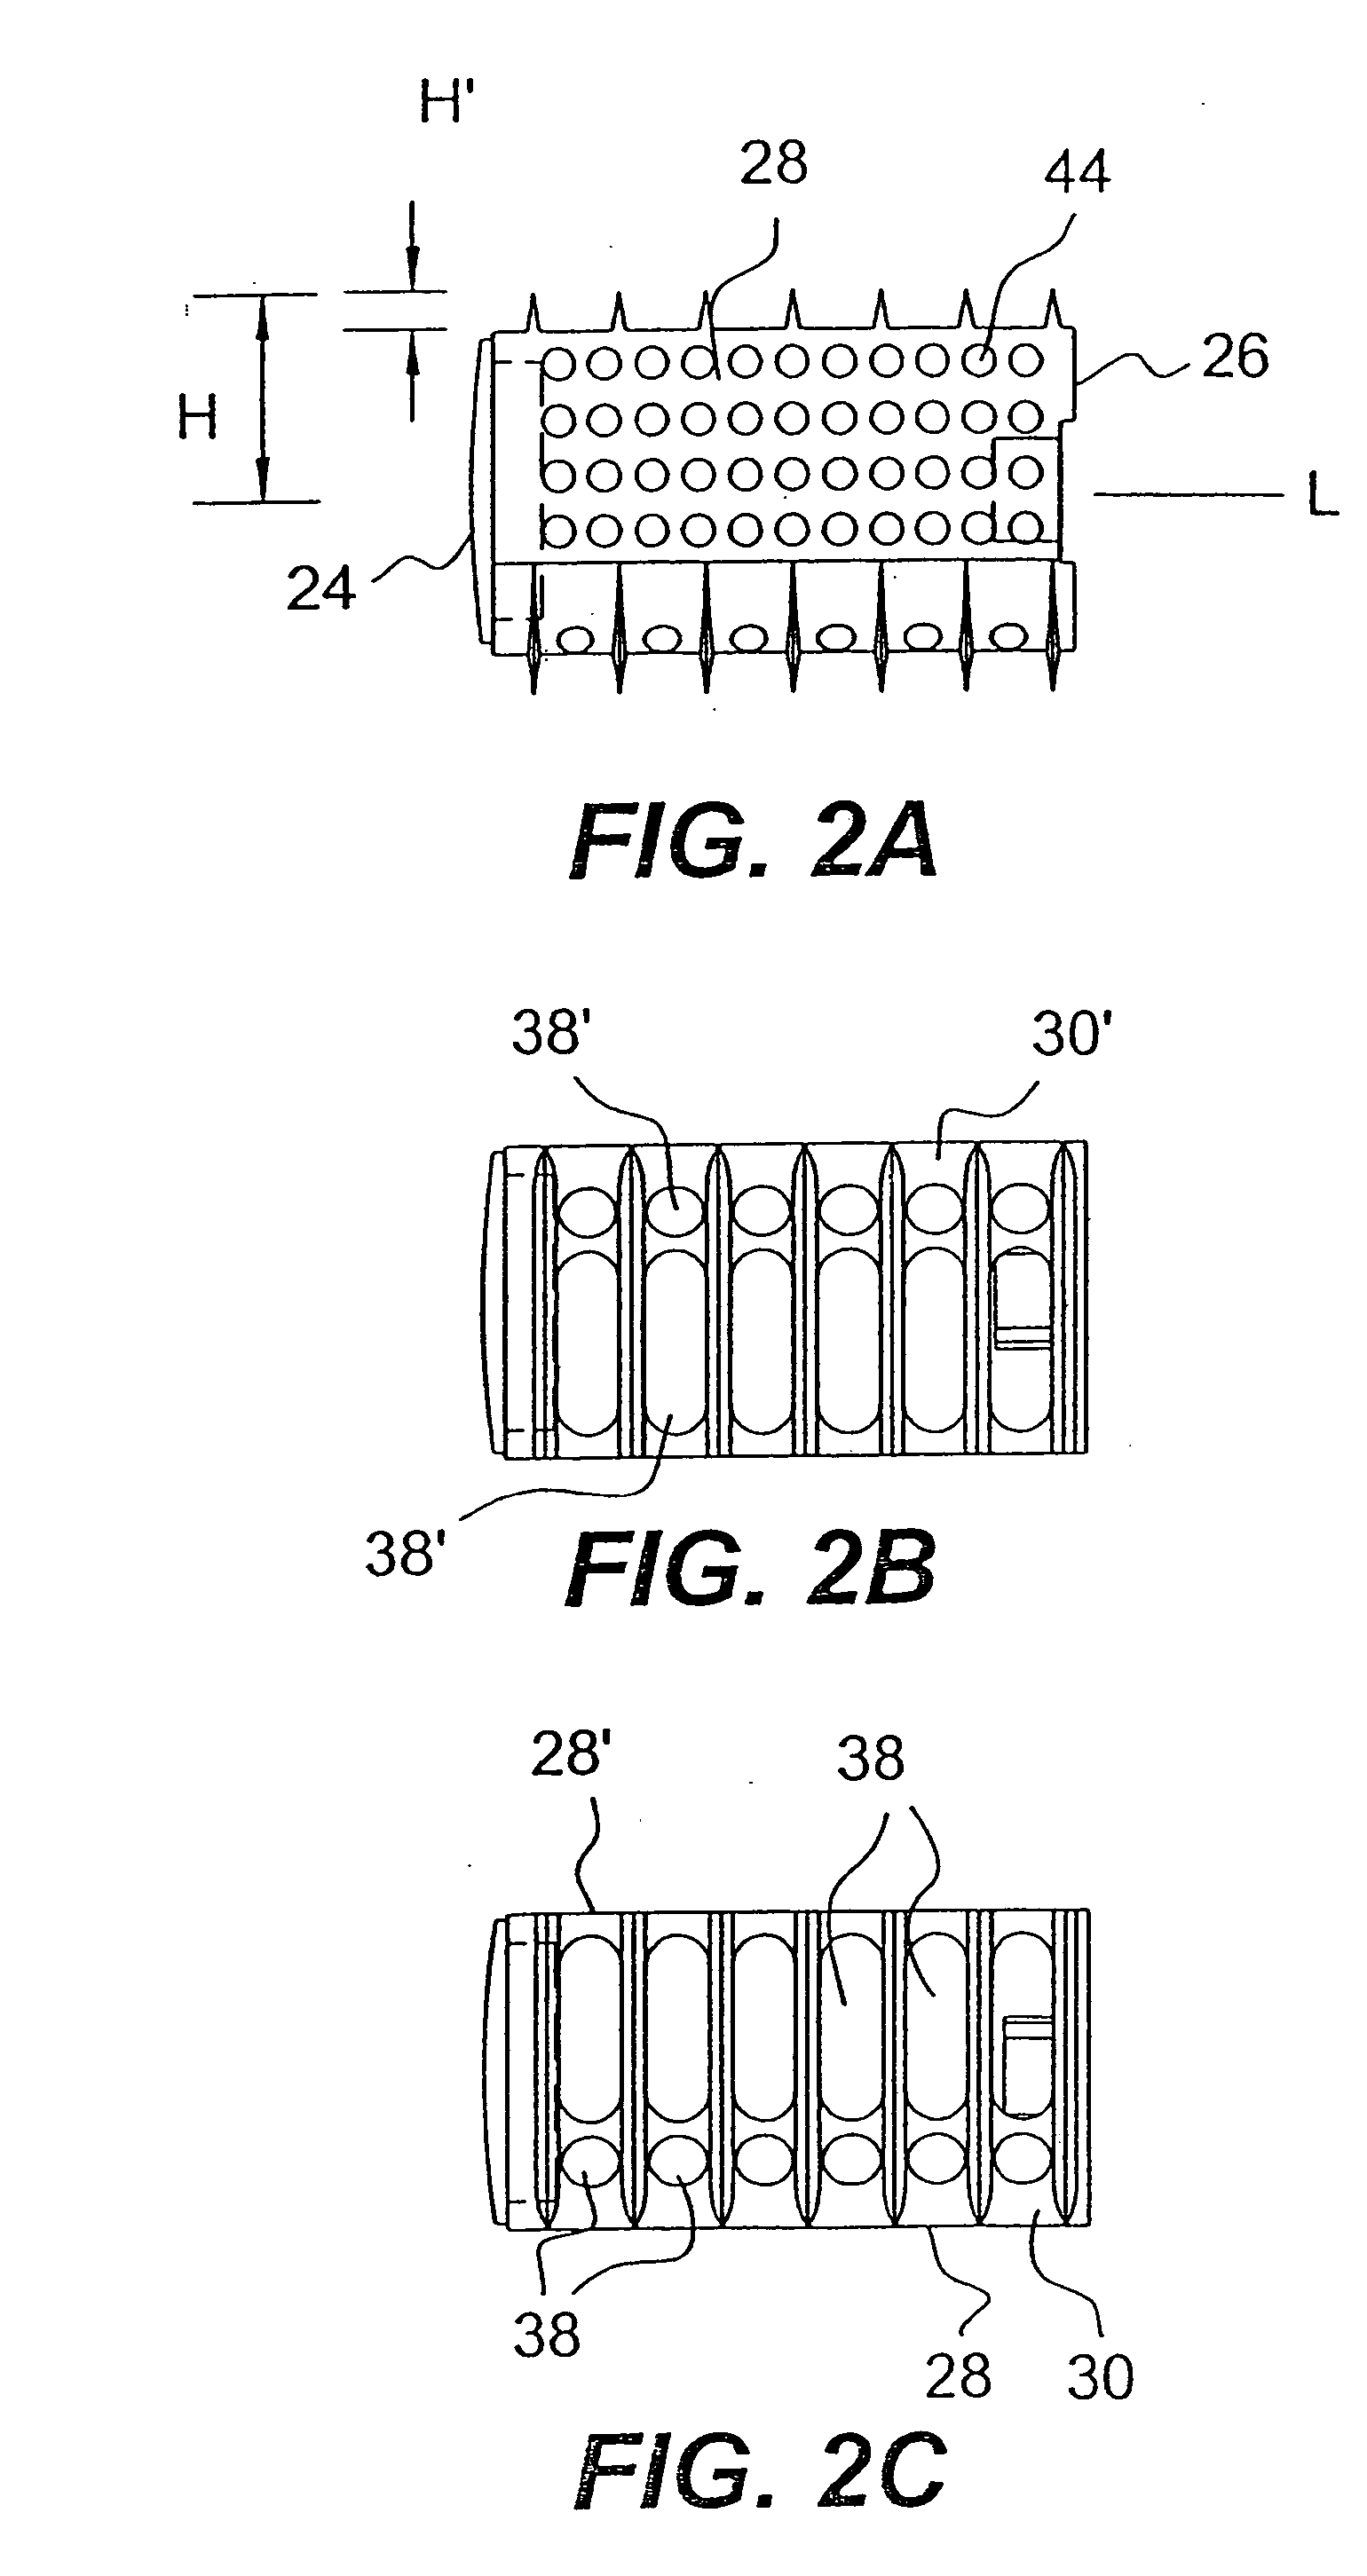 Method for inserting a fusion cage having a height substantially the same as the height between adjacent vertebral endplates